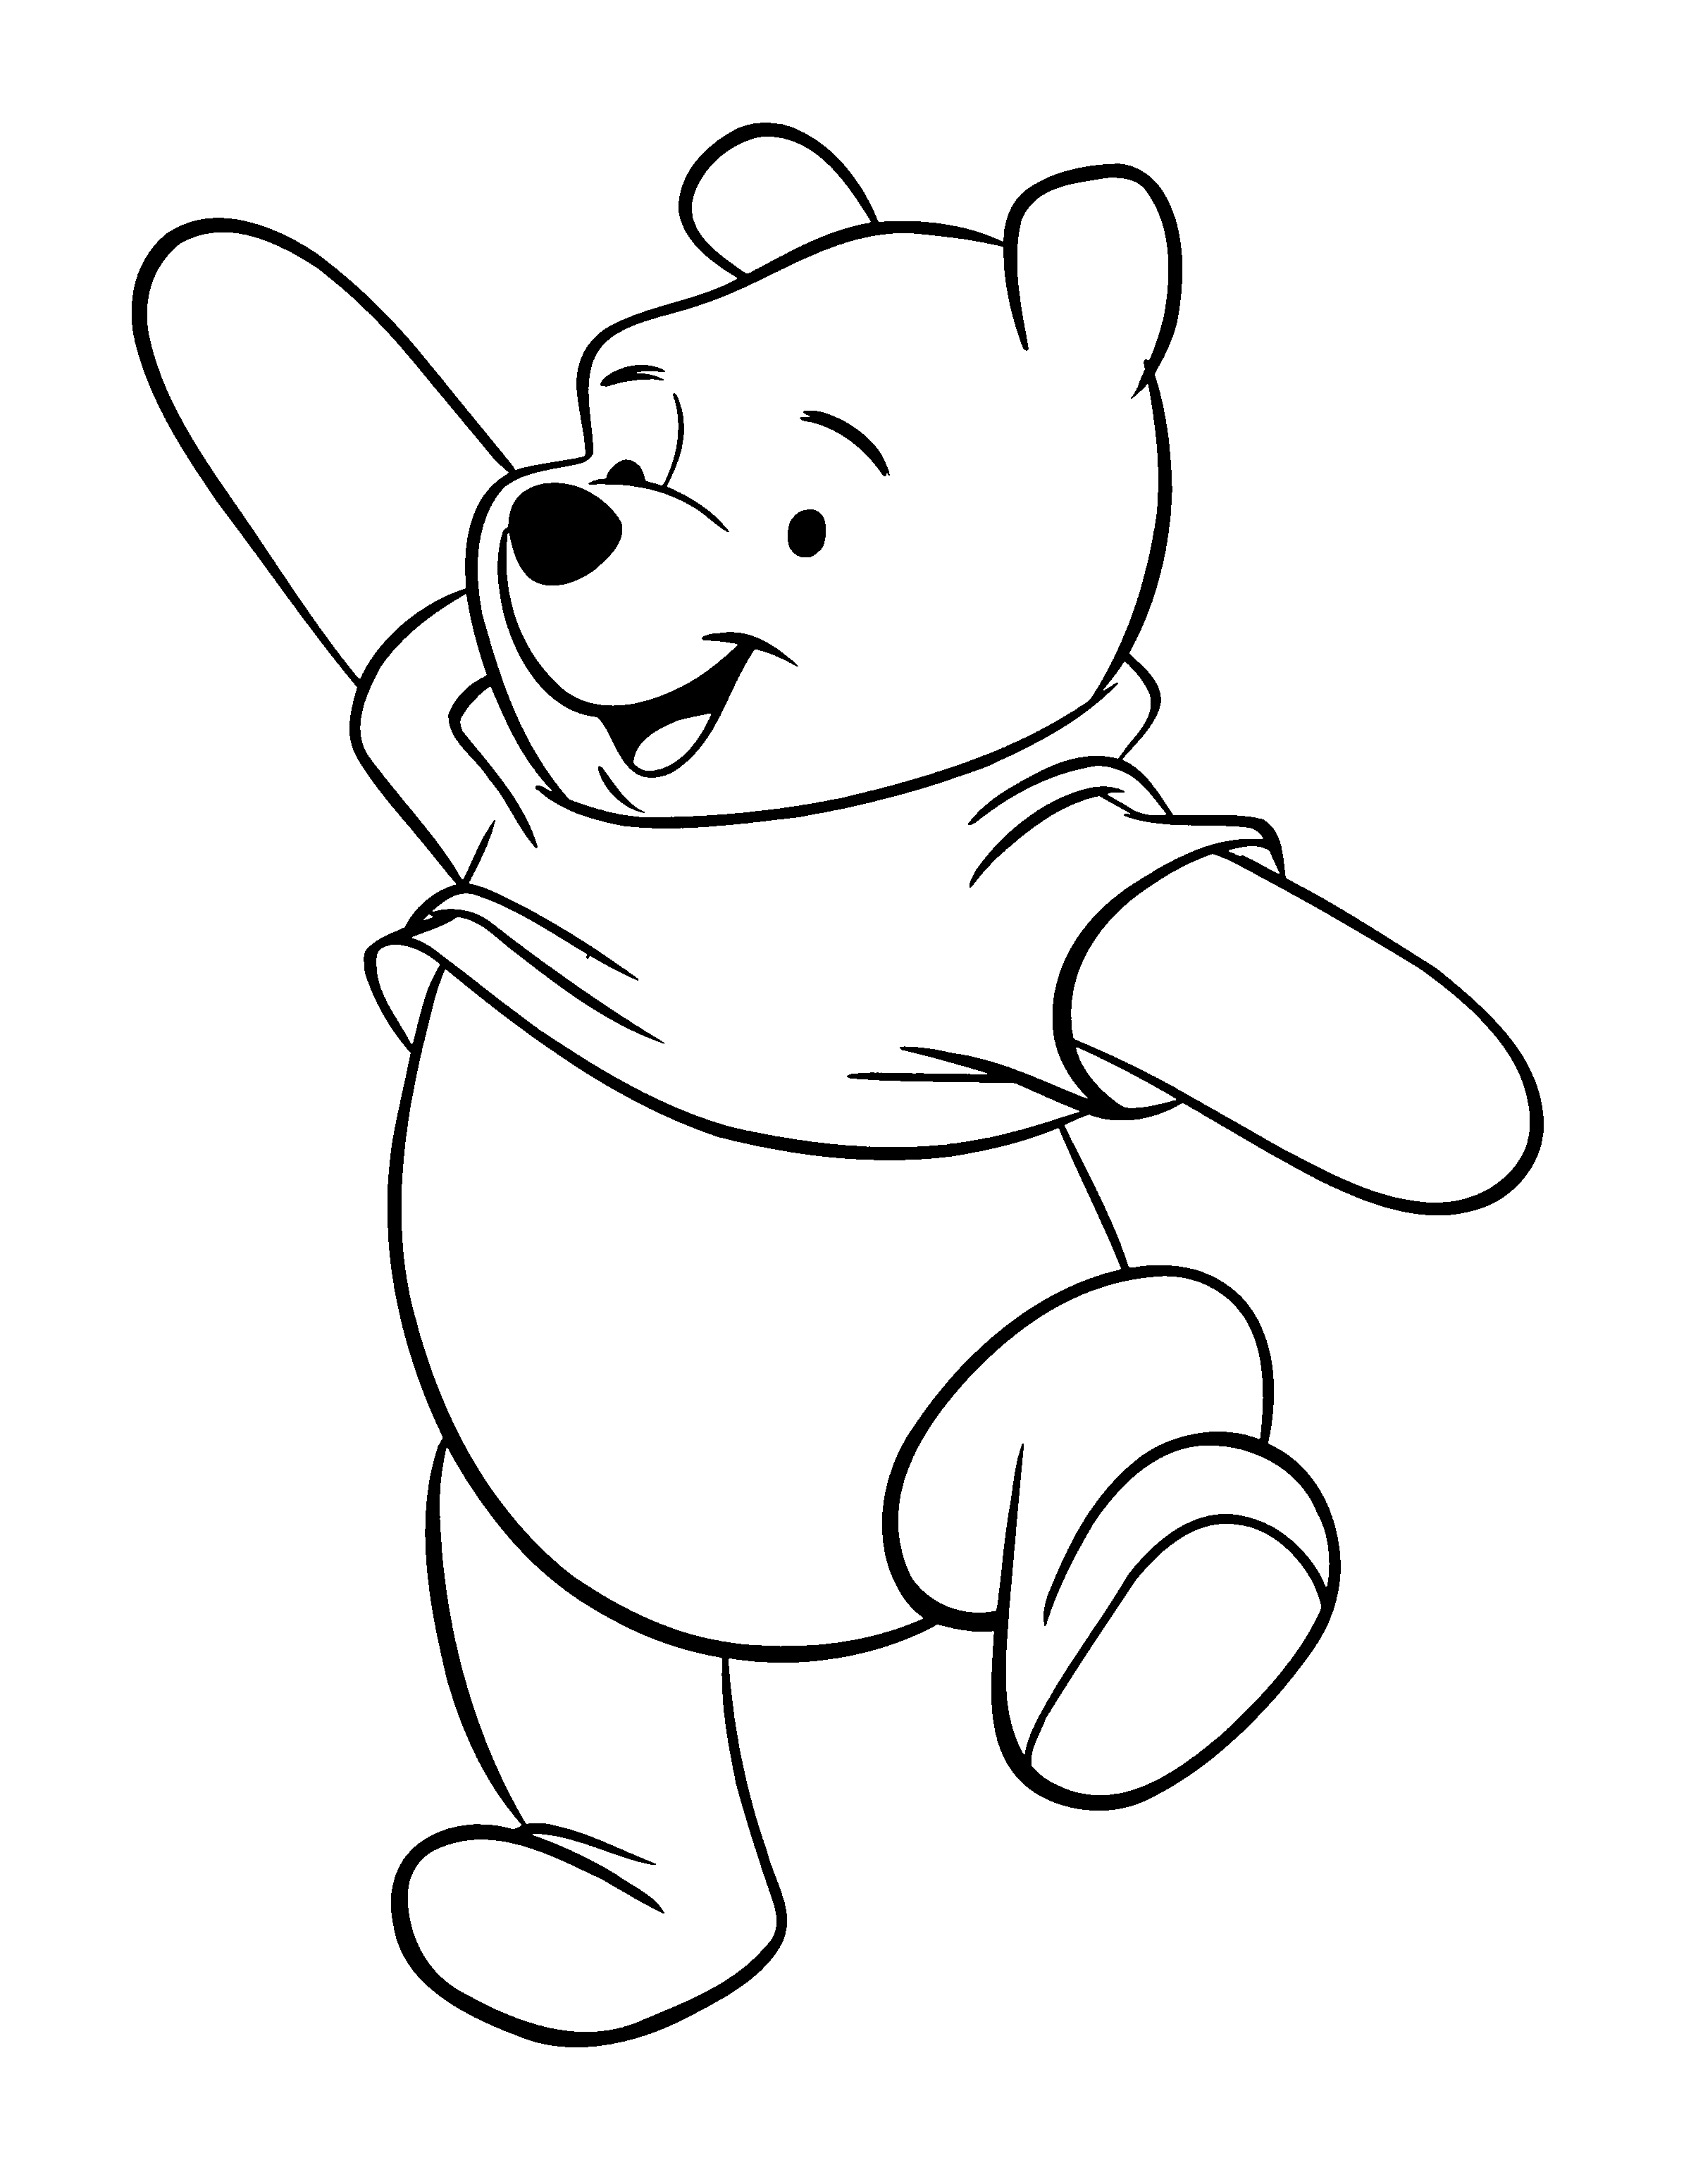 Winnie The Pooh Cuddle | Winnie the Pooh Coloring Pages ...